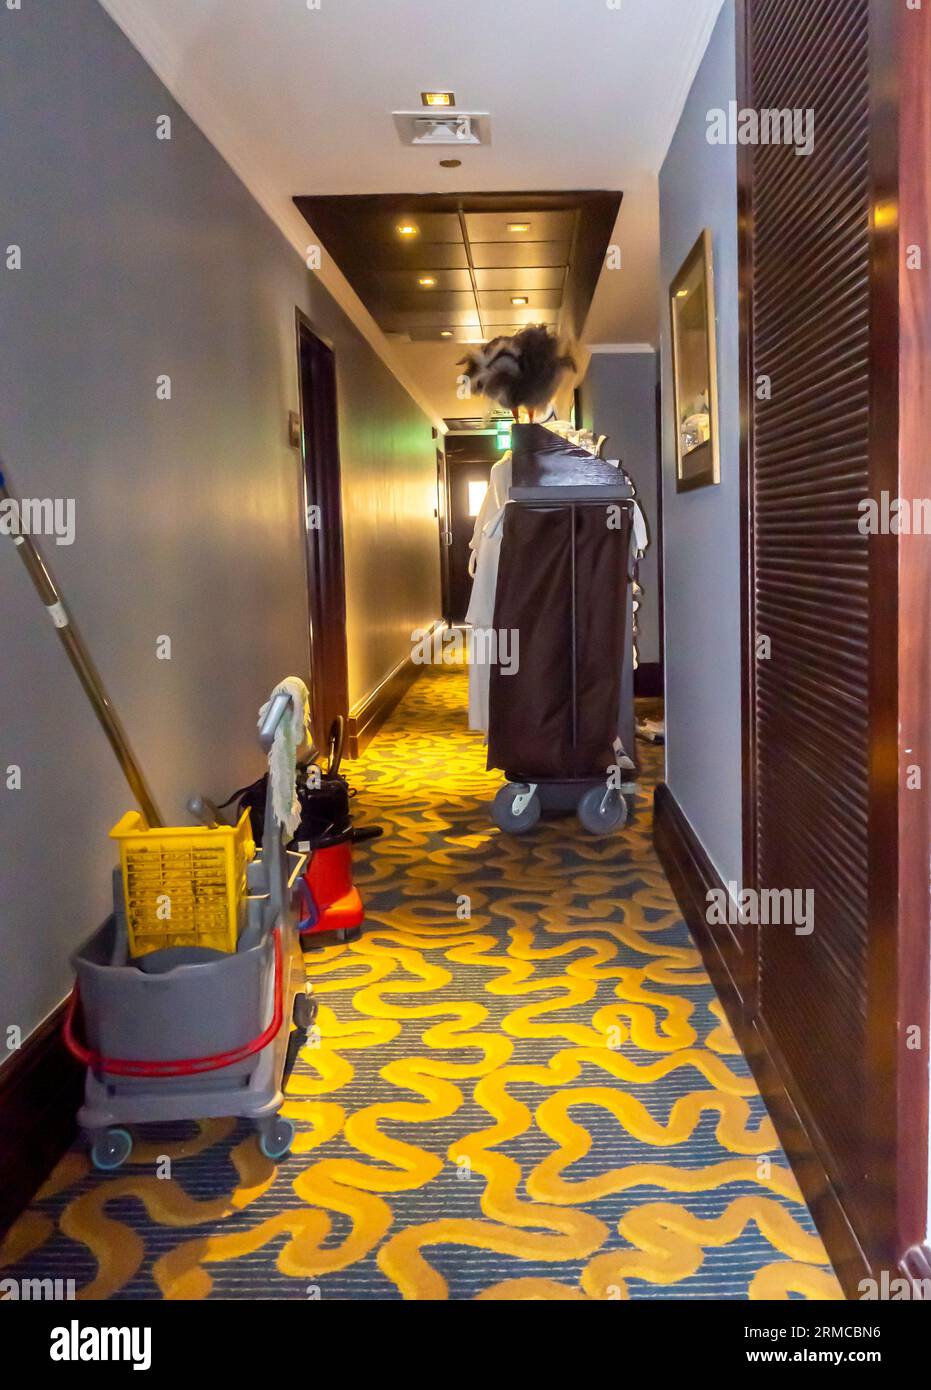 Housekeeping cart in a hotel corridor. Cleaning hospitality housekeeper's trolley beside a room entrance Stock Photo